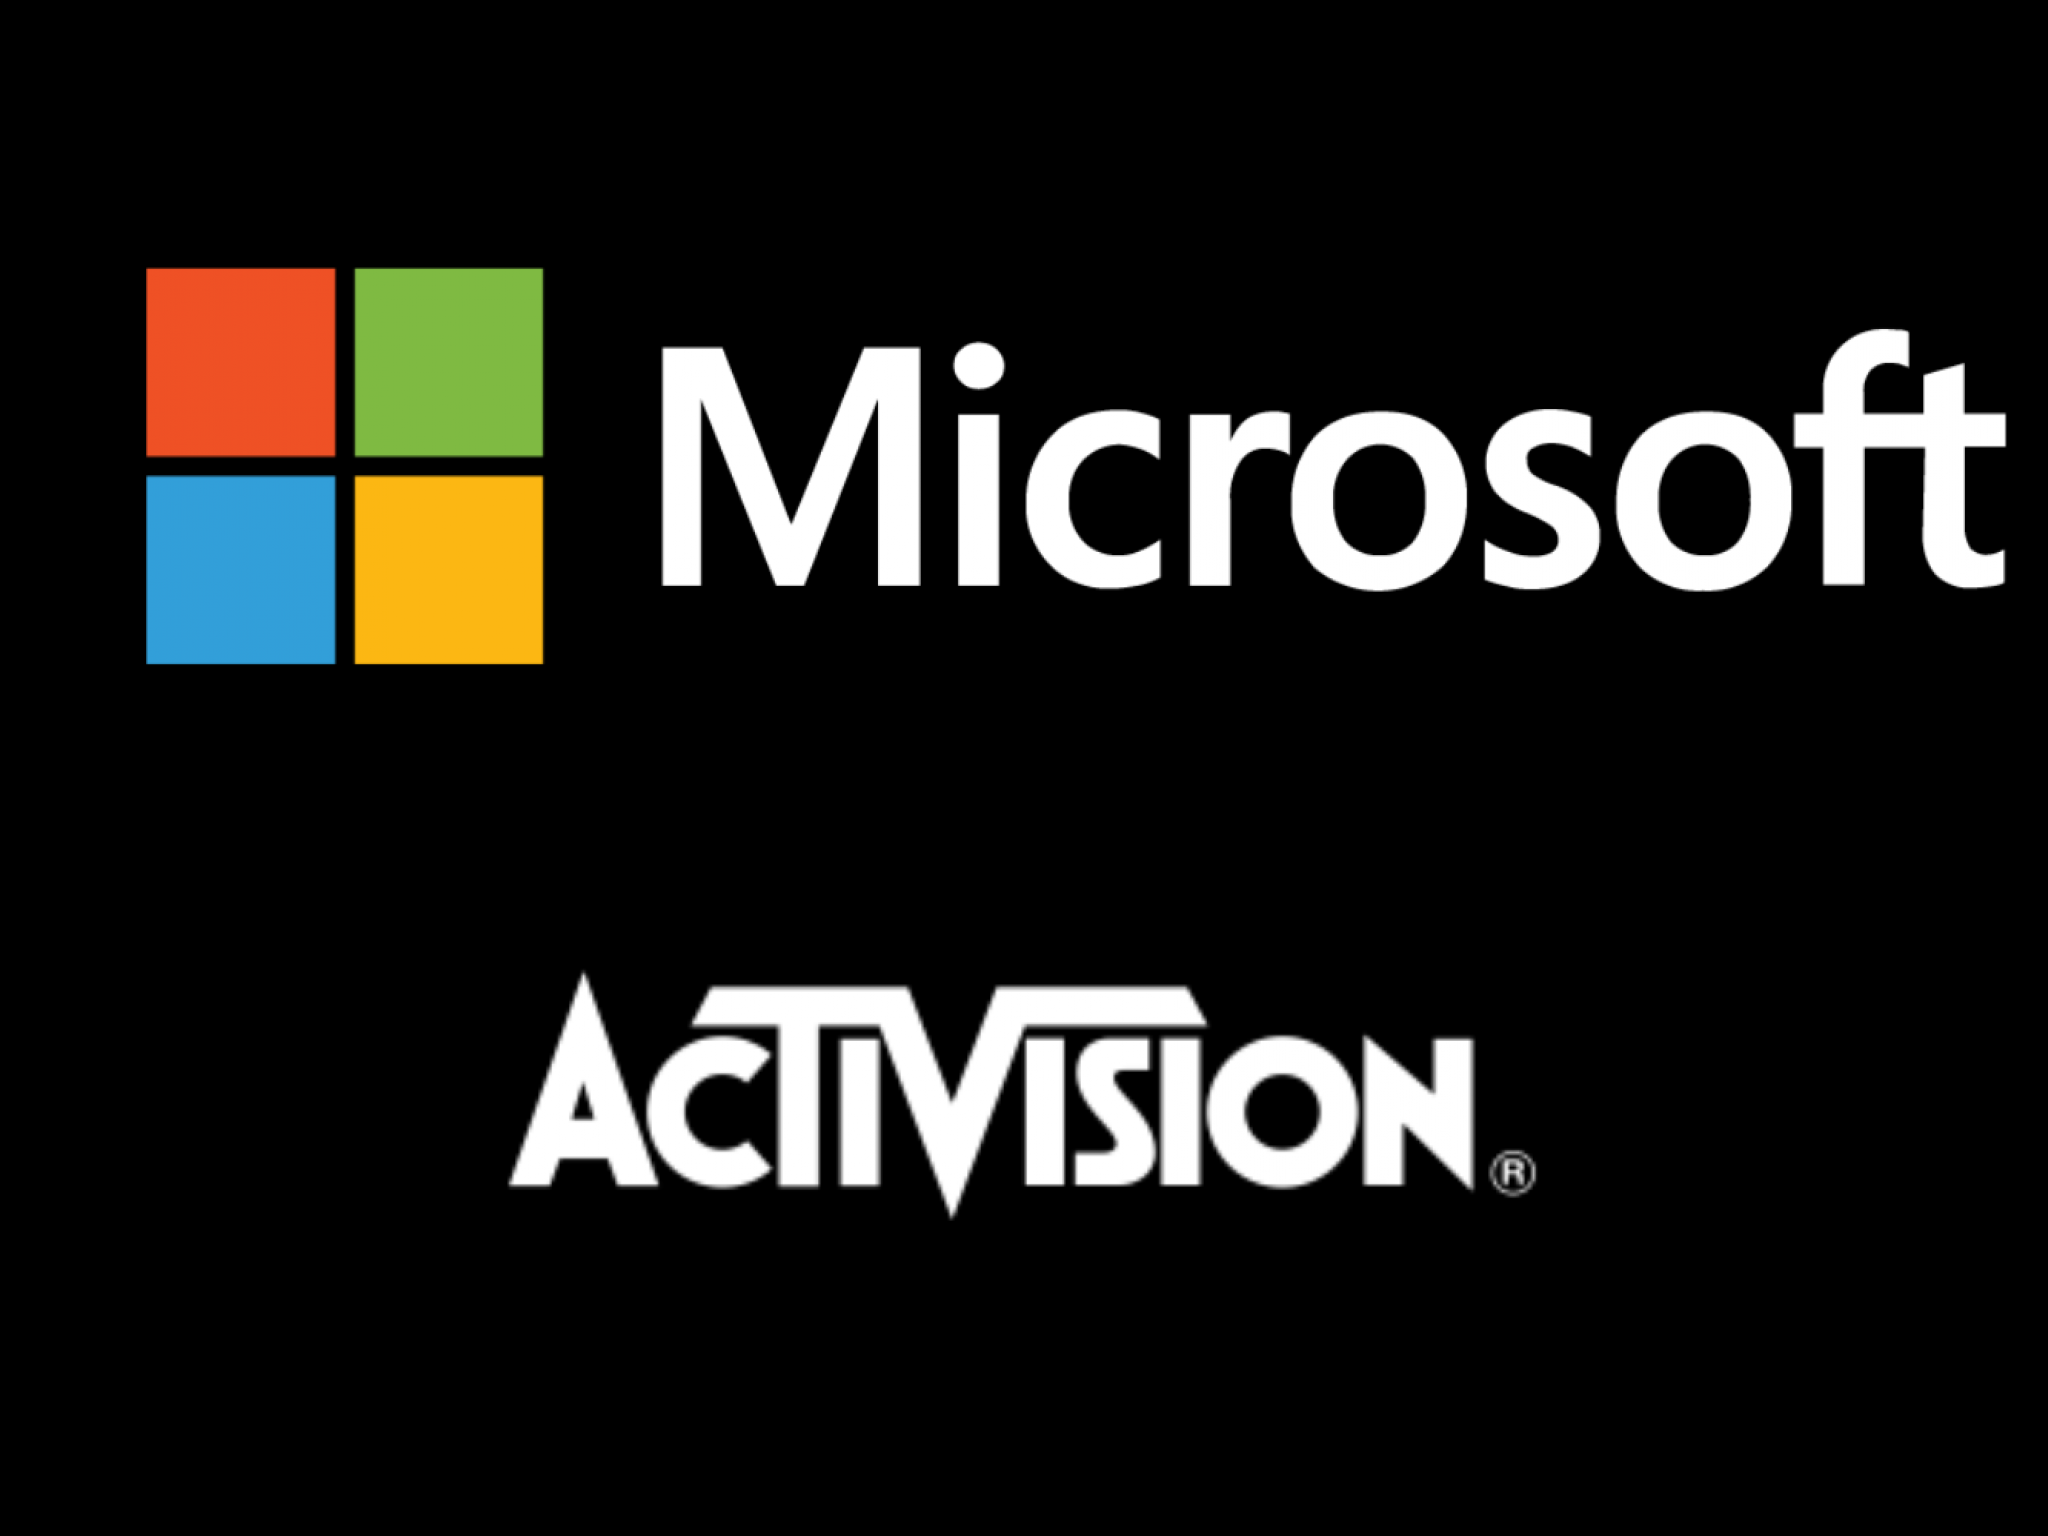  warren-buffetts-berkshires-missed-gains-buffett-sells-majority-of-activision-blizzard-stake-before-microsoft-deal-approval 